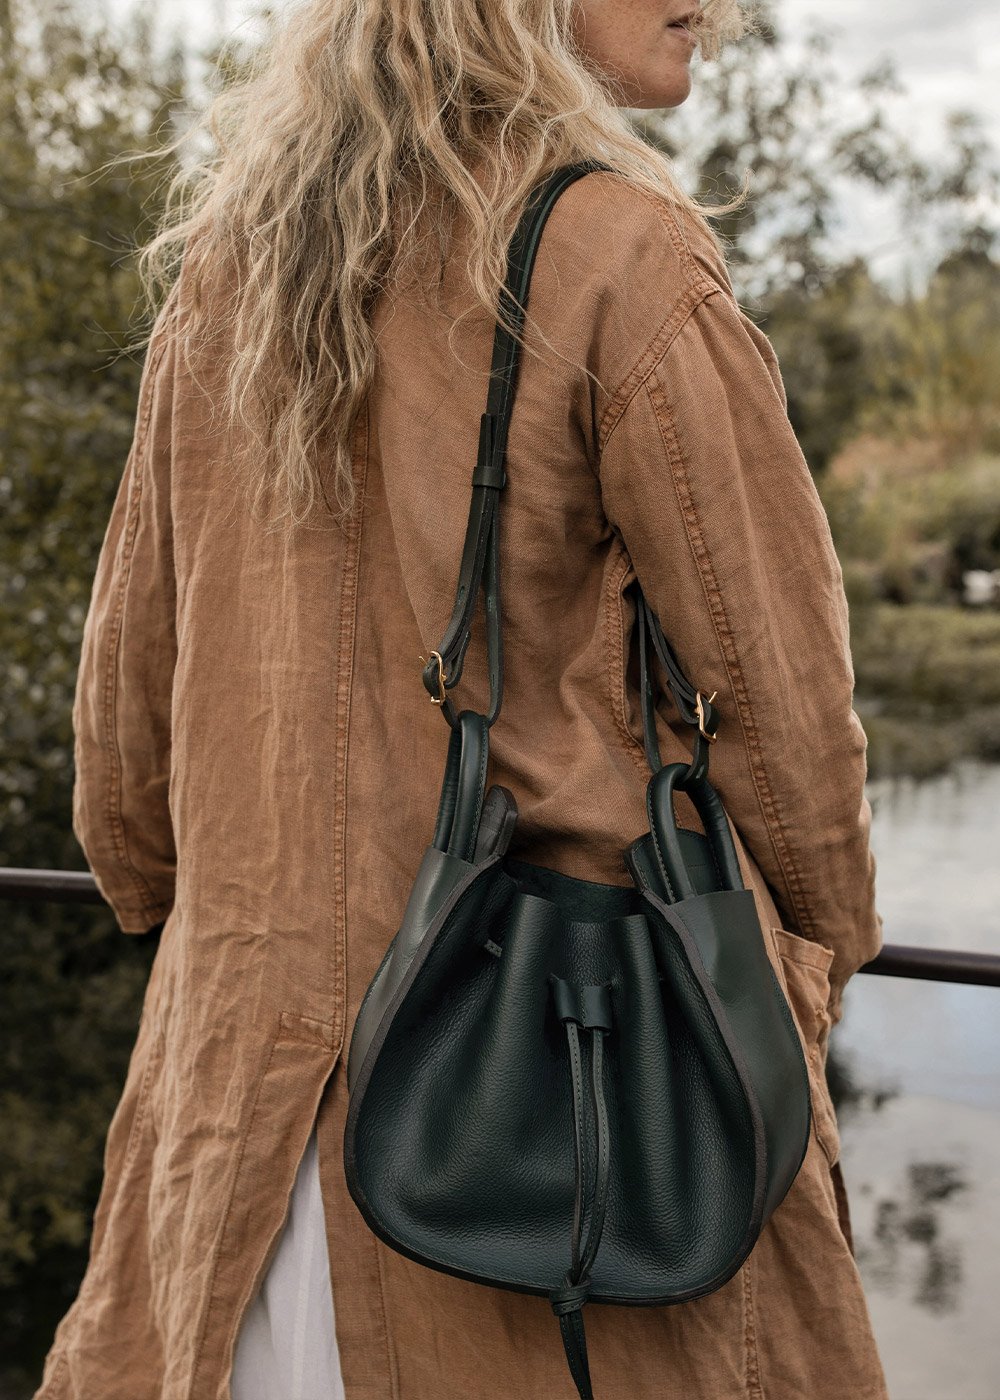 A woman wearing a leather shoulder bag